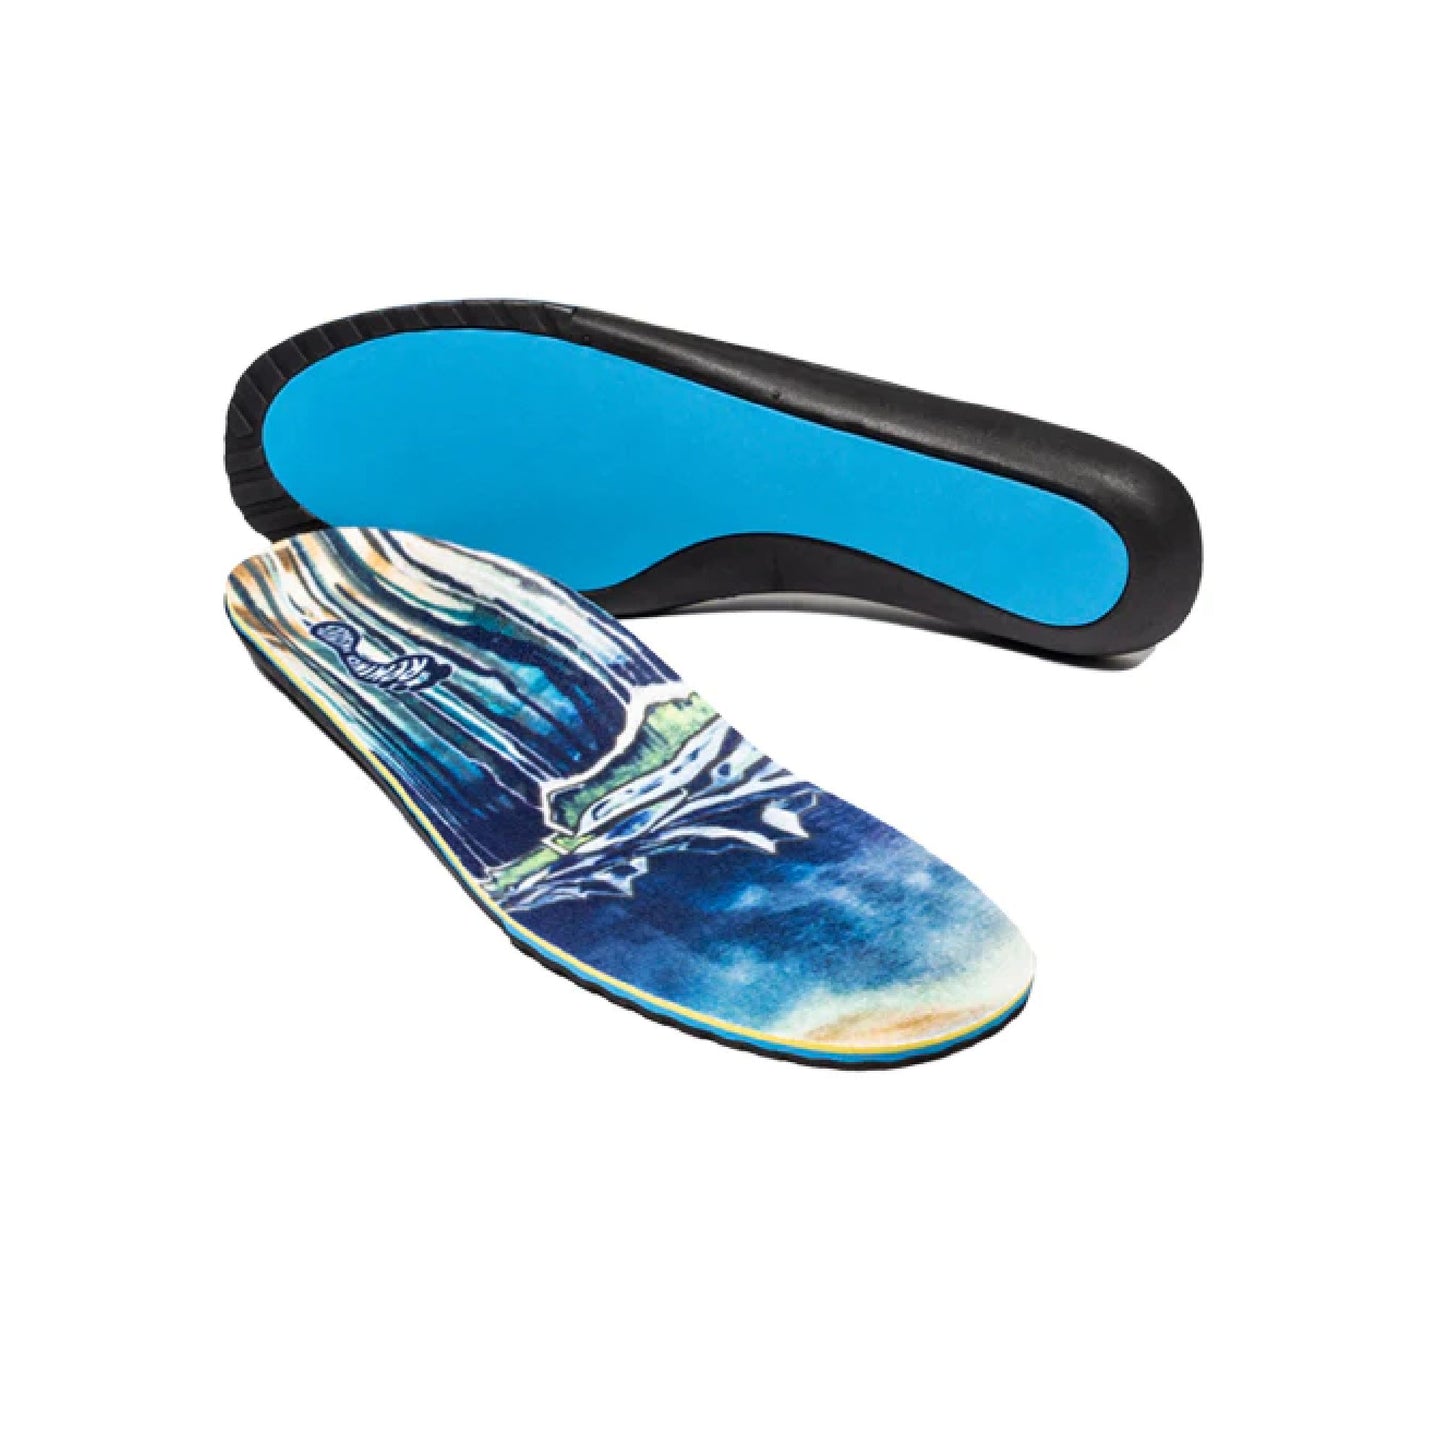 Remind Insoles Medic Impact 6mm Insoles Bryan Iguchi This Cycle Insoles